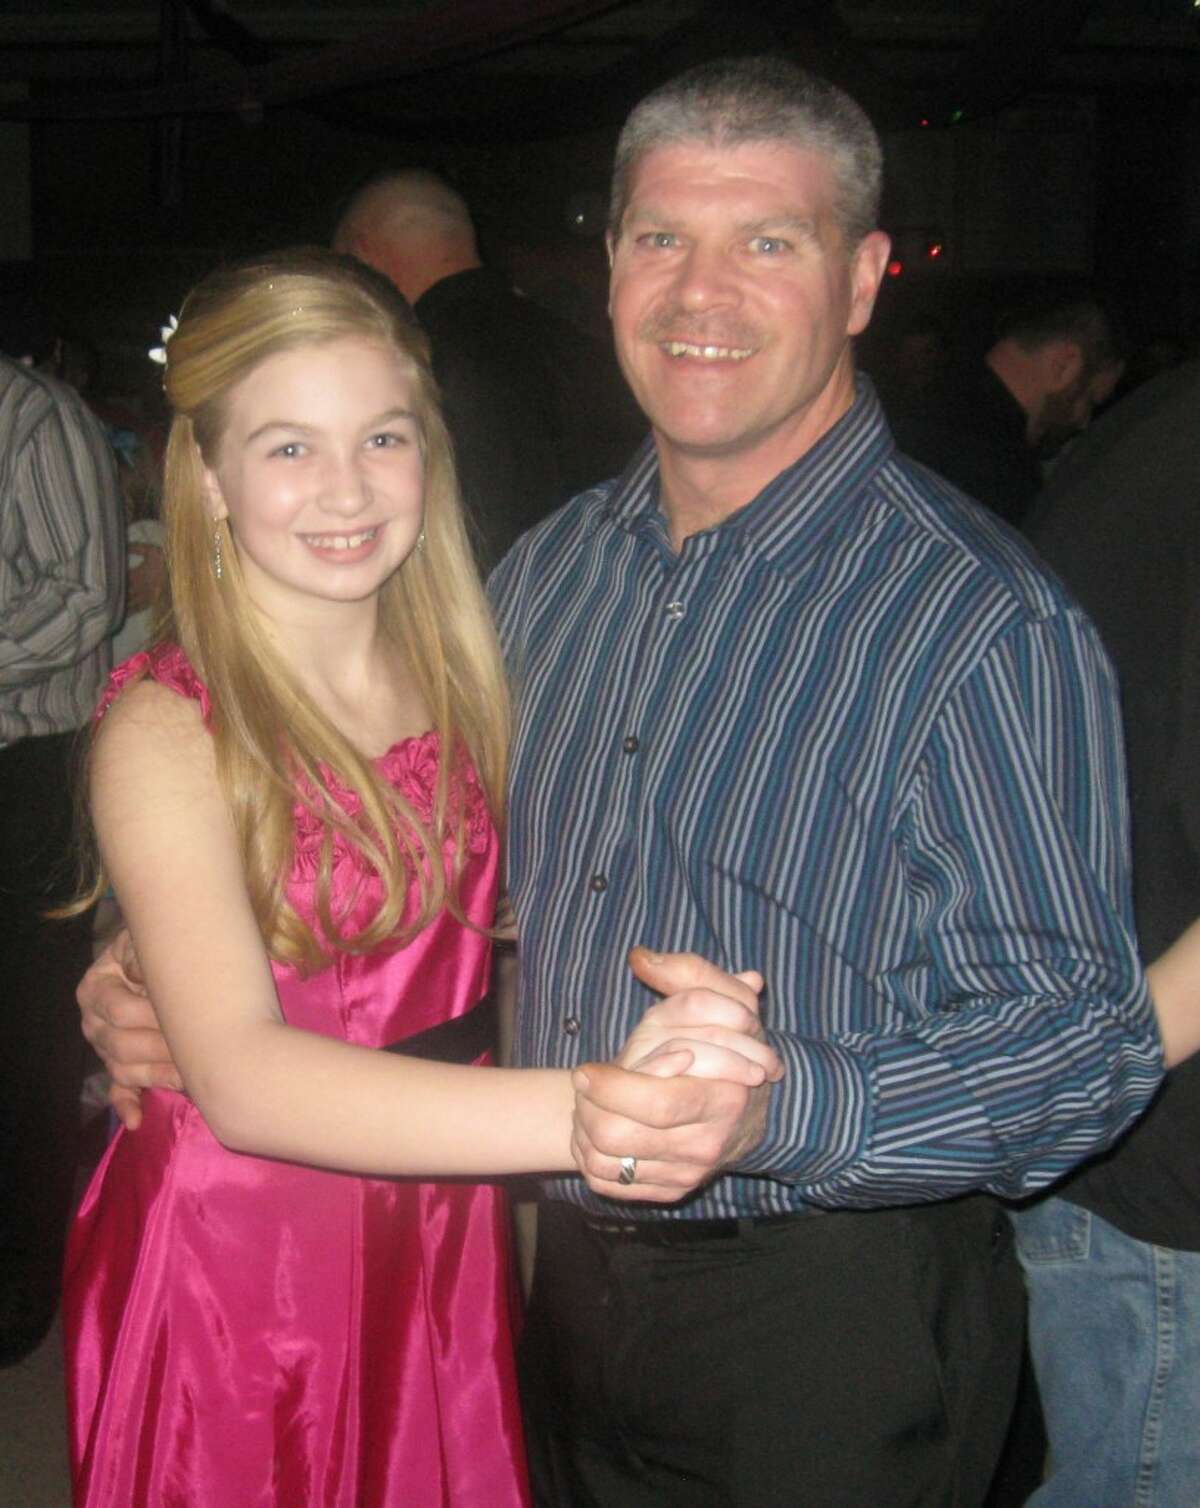 DANCING THE NIGHT AWAY: Morley Stanwood Elementary School held its first Daddy-Daughter Dance on Feb. 9. More than 180 people attended the dance, which was funded by the student council. (Courtesy photos)